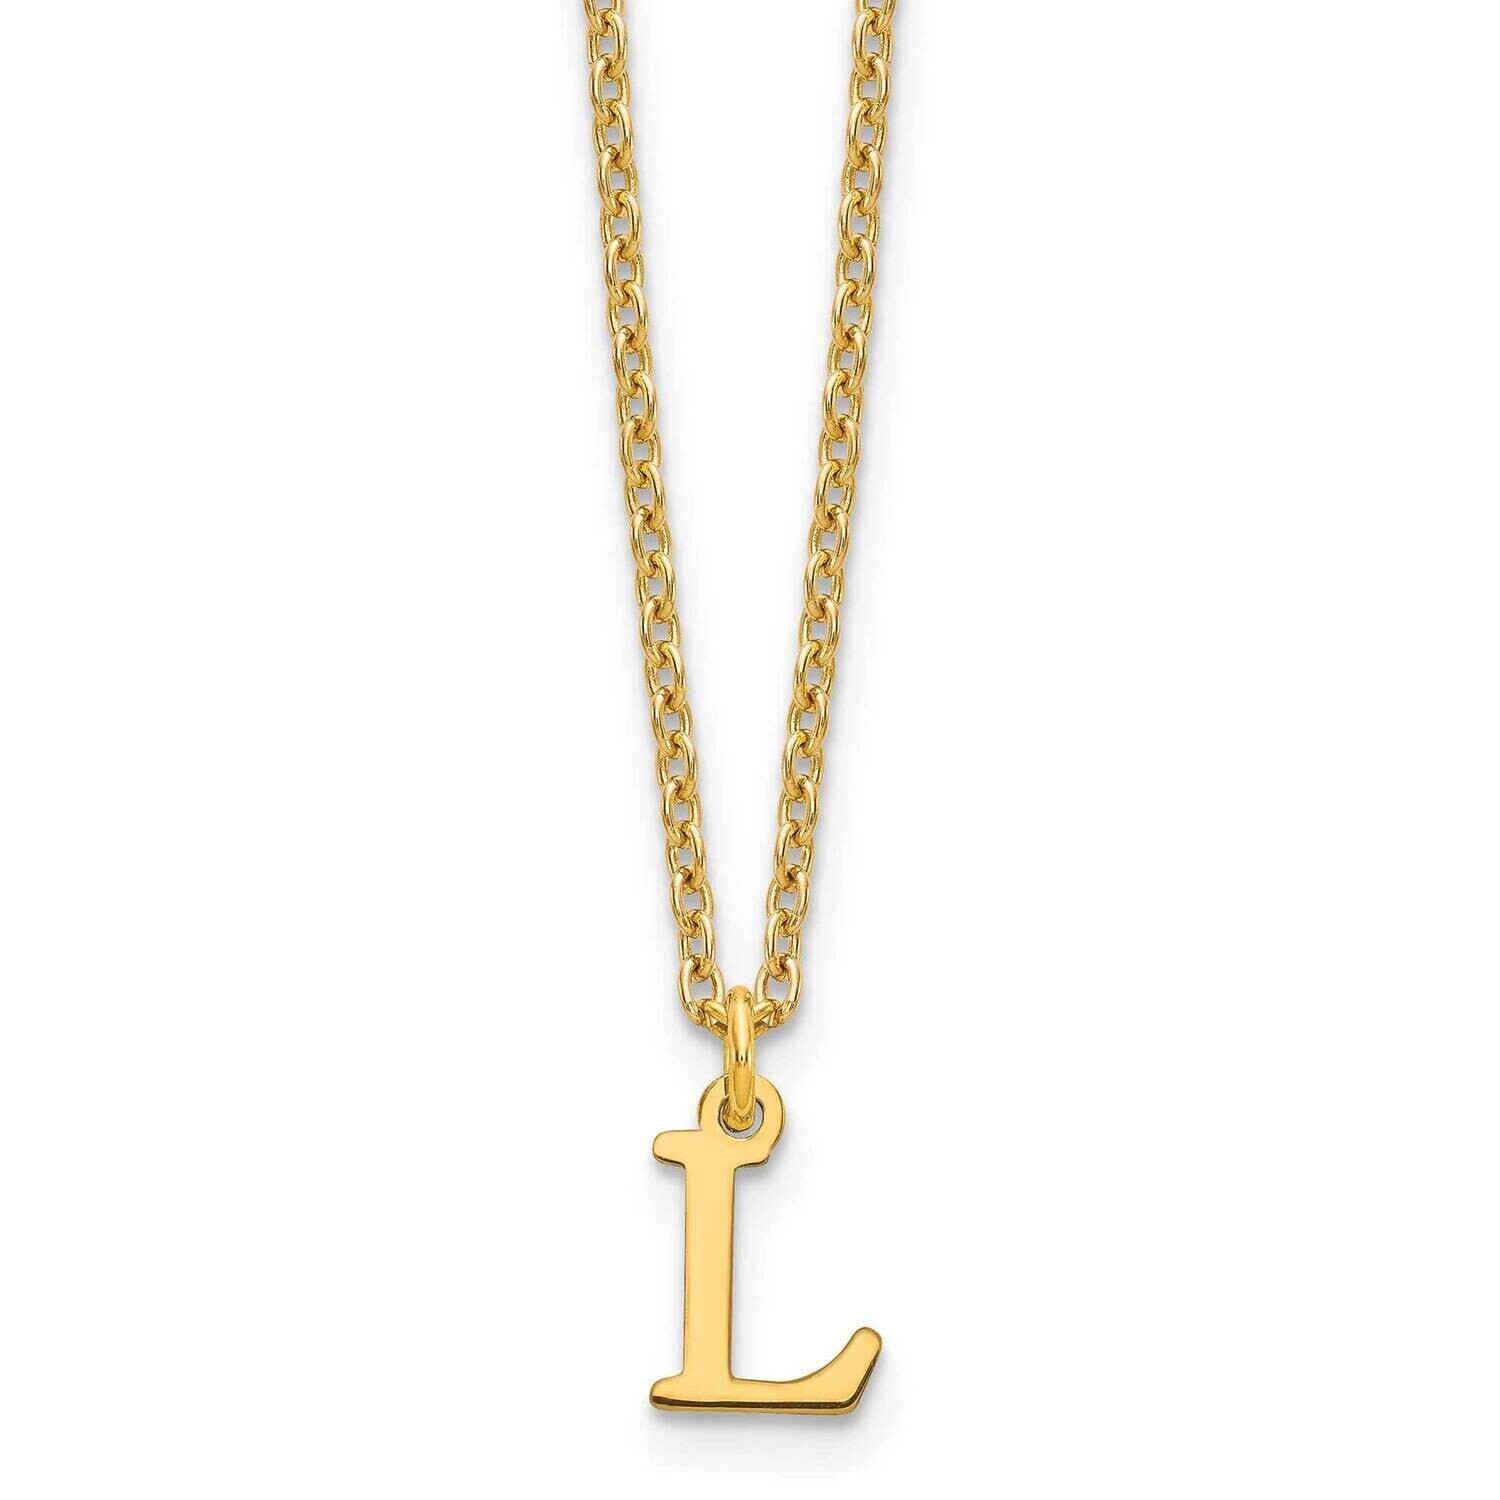 Gold-Plated Cutout Letter L Initial Necklace Sterling Silver XNA727GP/L